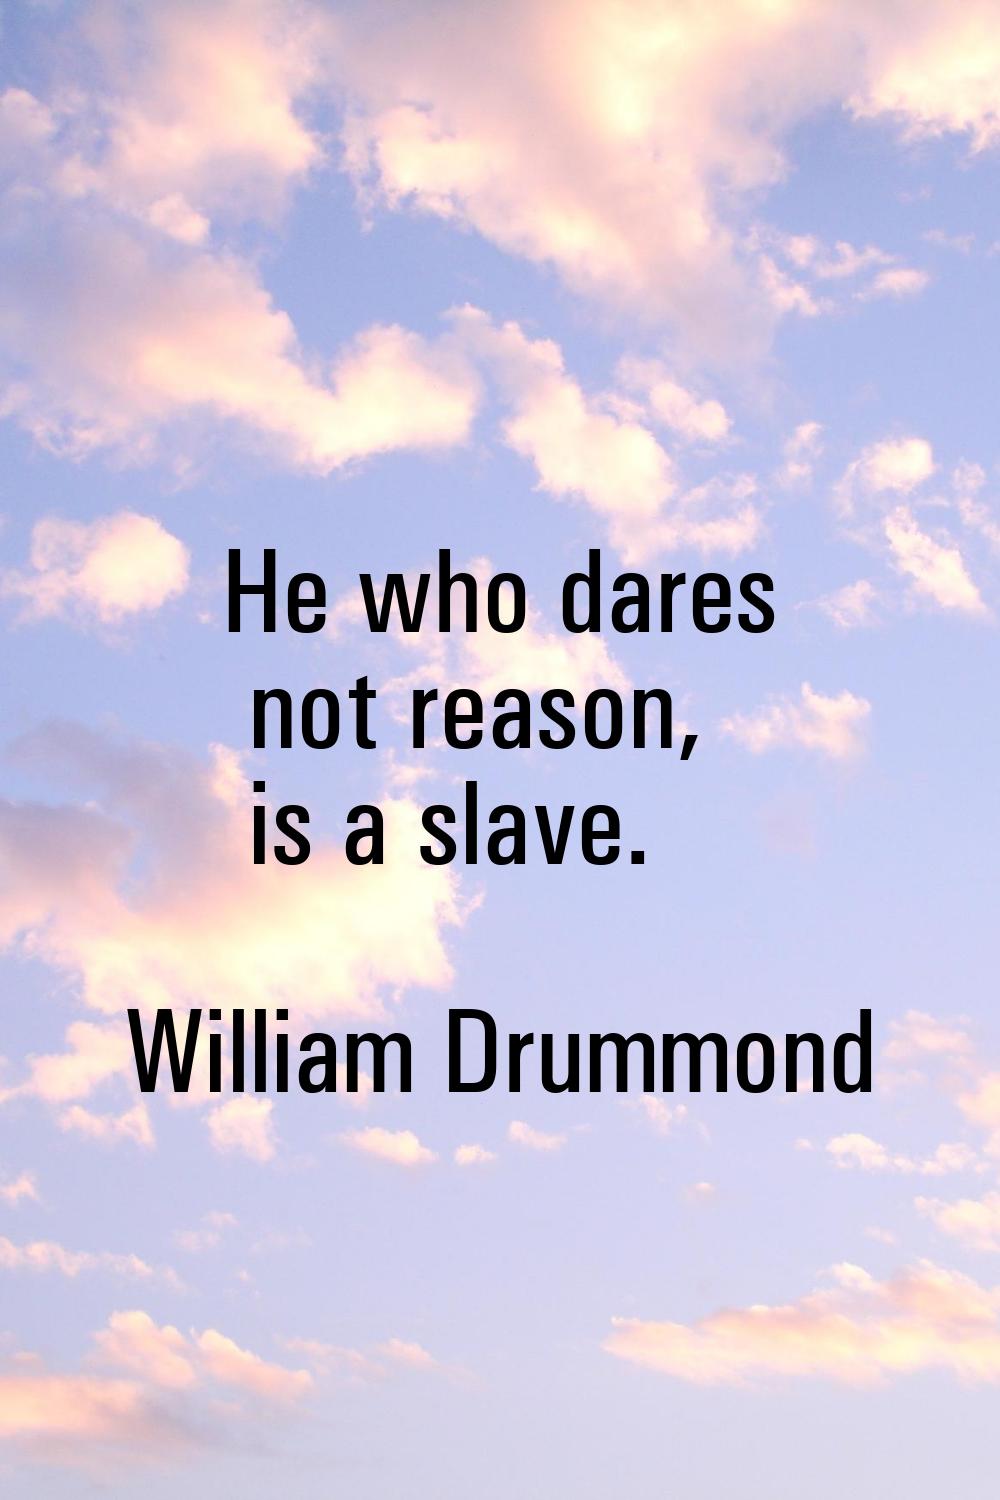 He who dares not reason, is a slave.